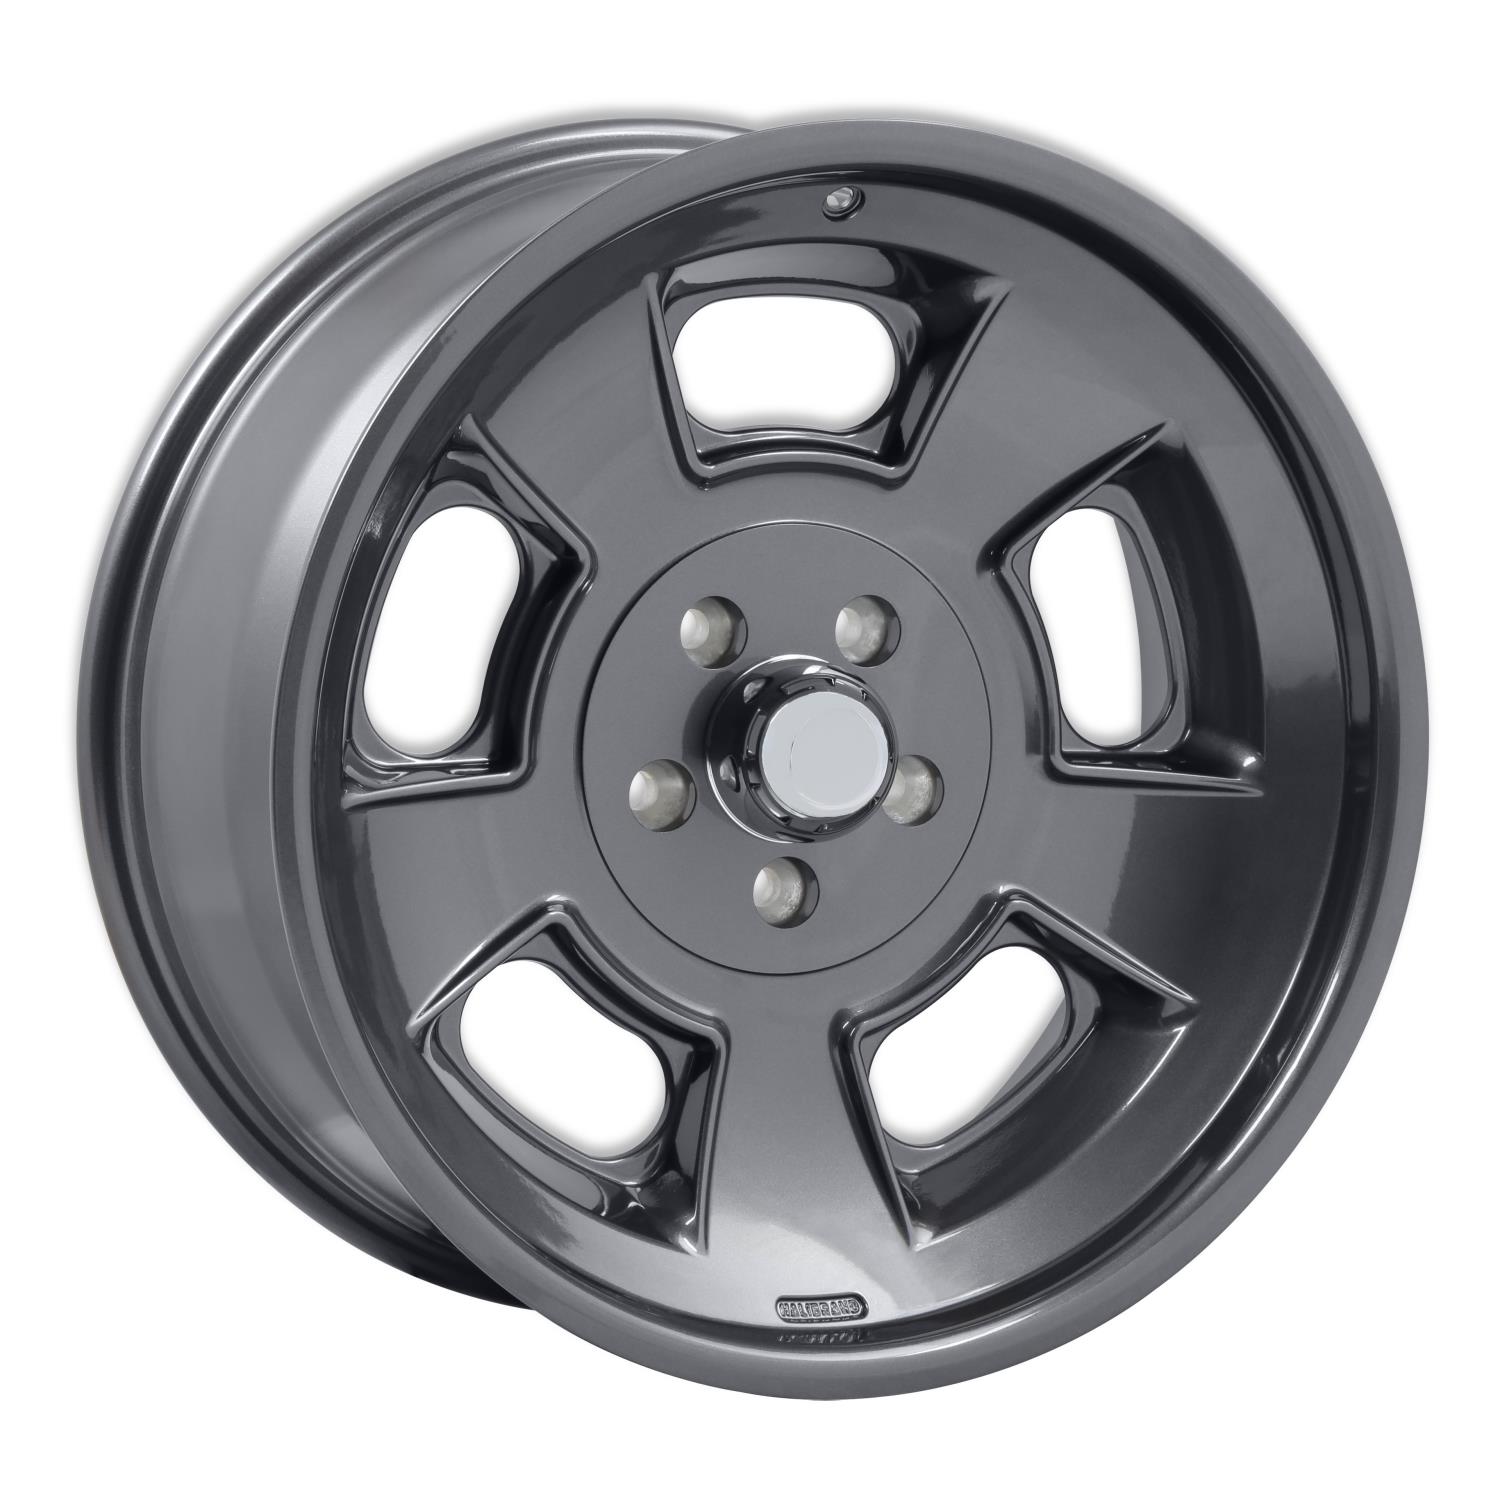 Sprint Front Wheel, Size: 20x8.5", Bolt Pattern: 5x5", Backspace: 4.5" [Anthracite - Gloss Clearcoat]